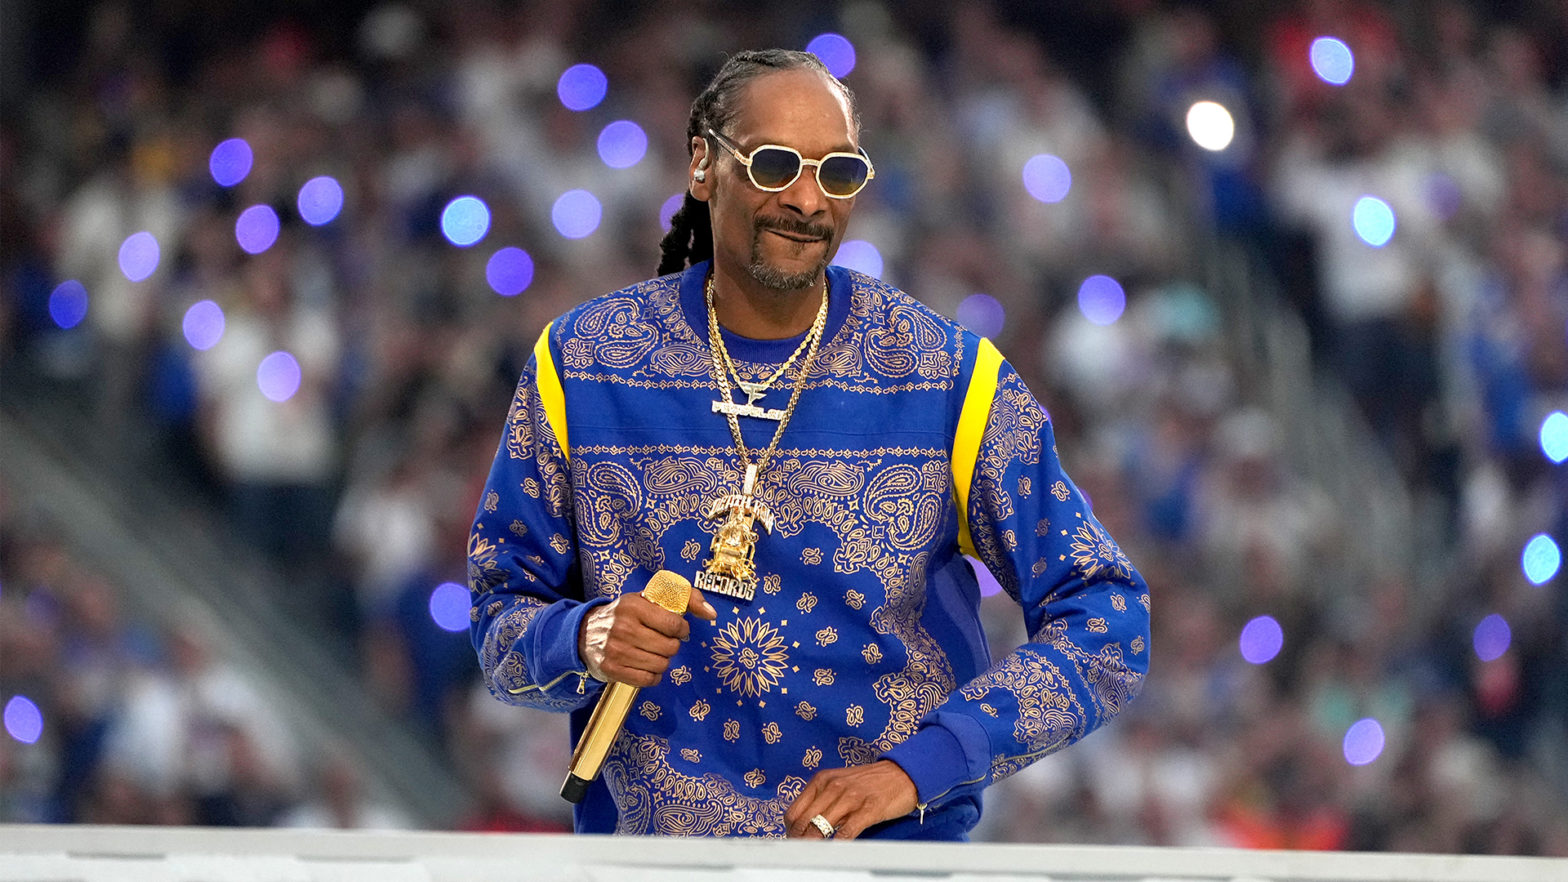 According To Snoop Dogg, Death Row Records Has Made About $40M In The Metaverse